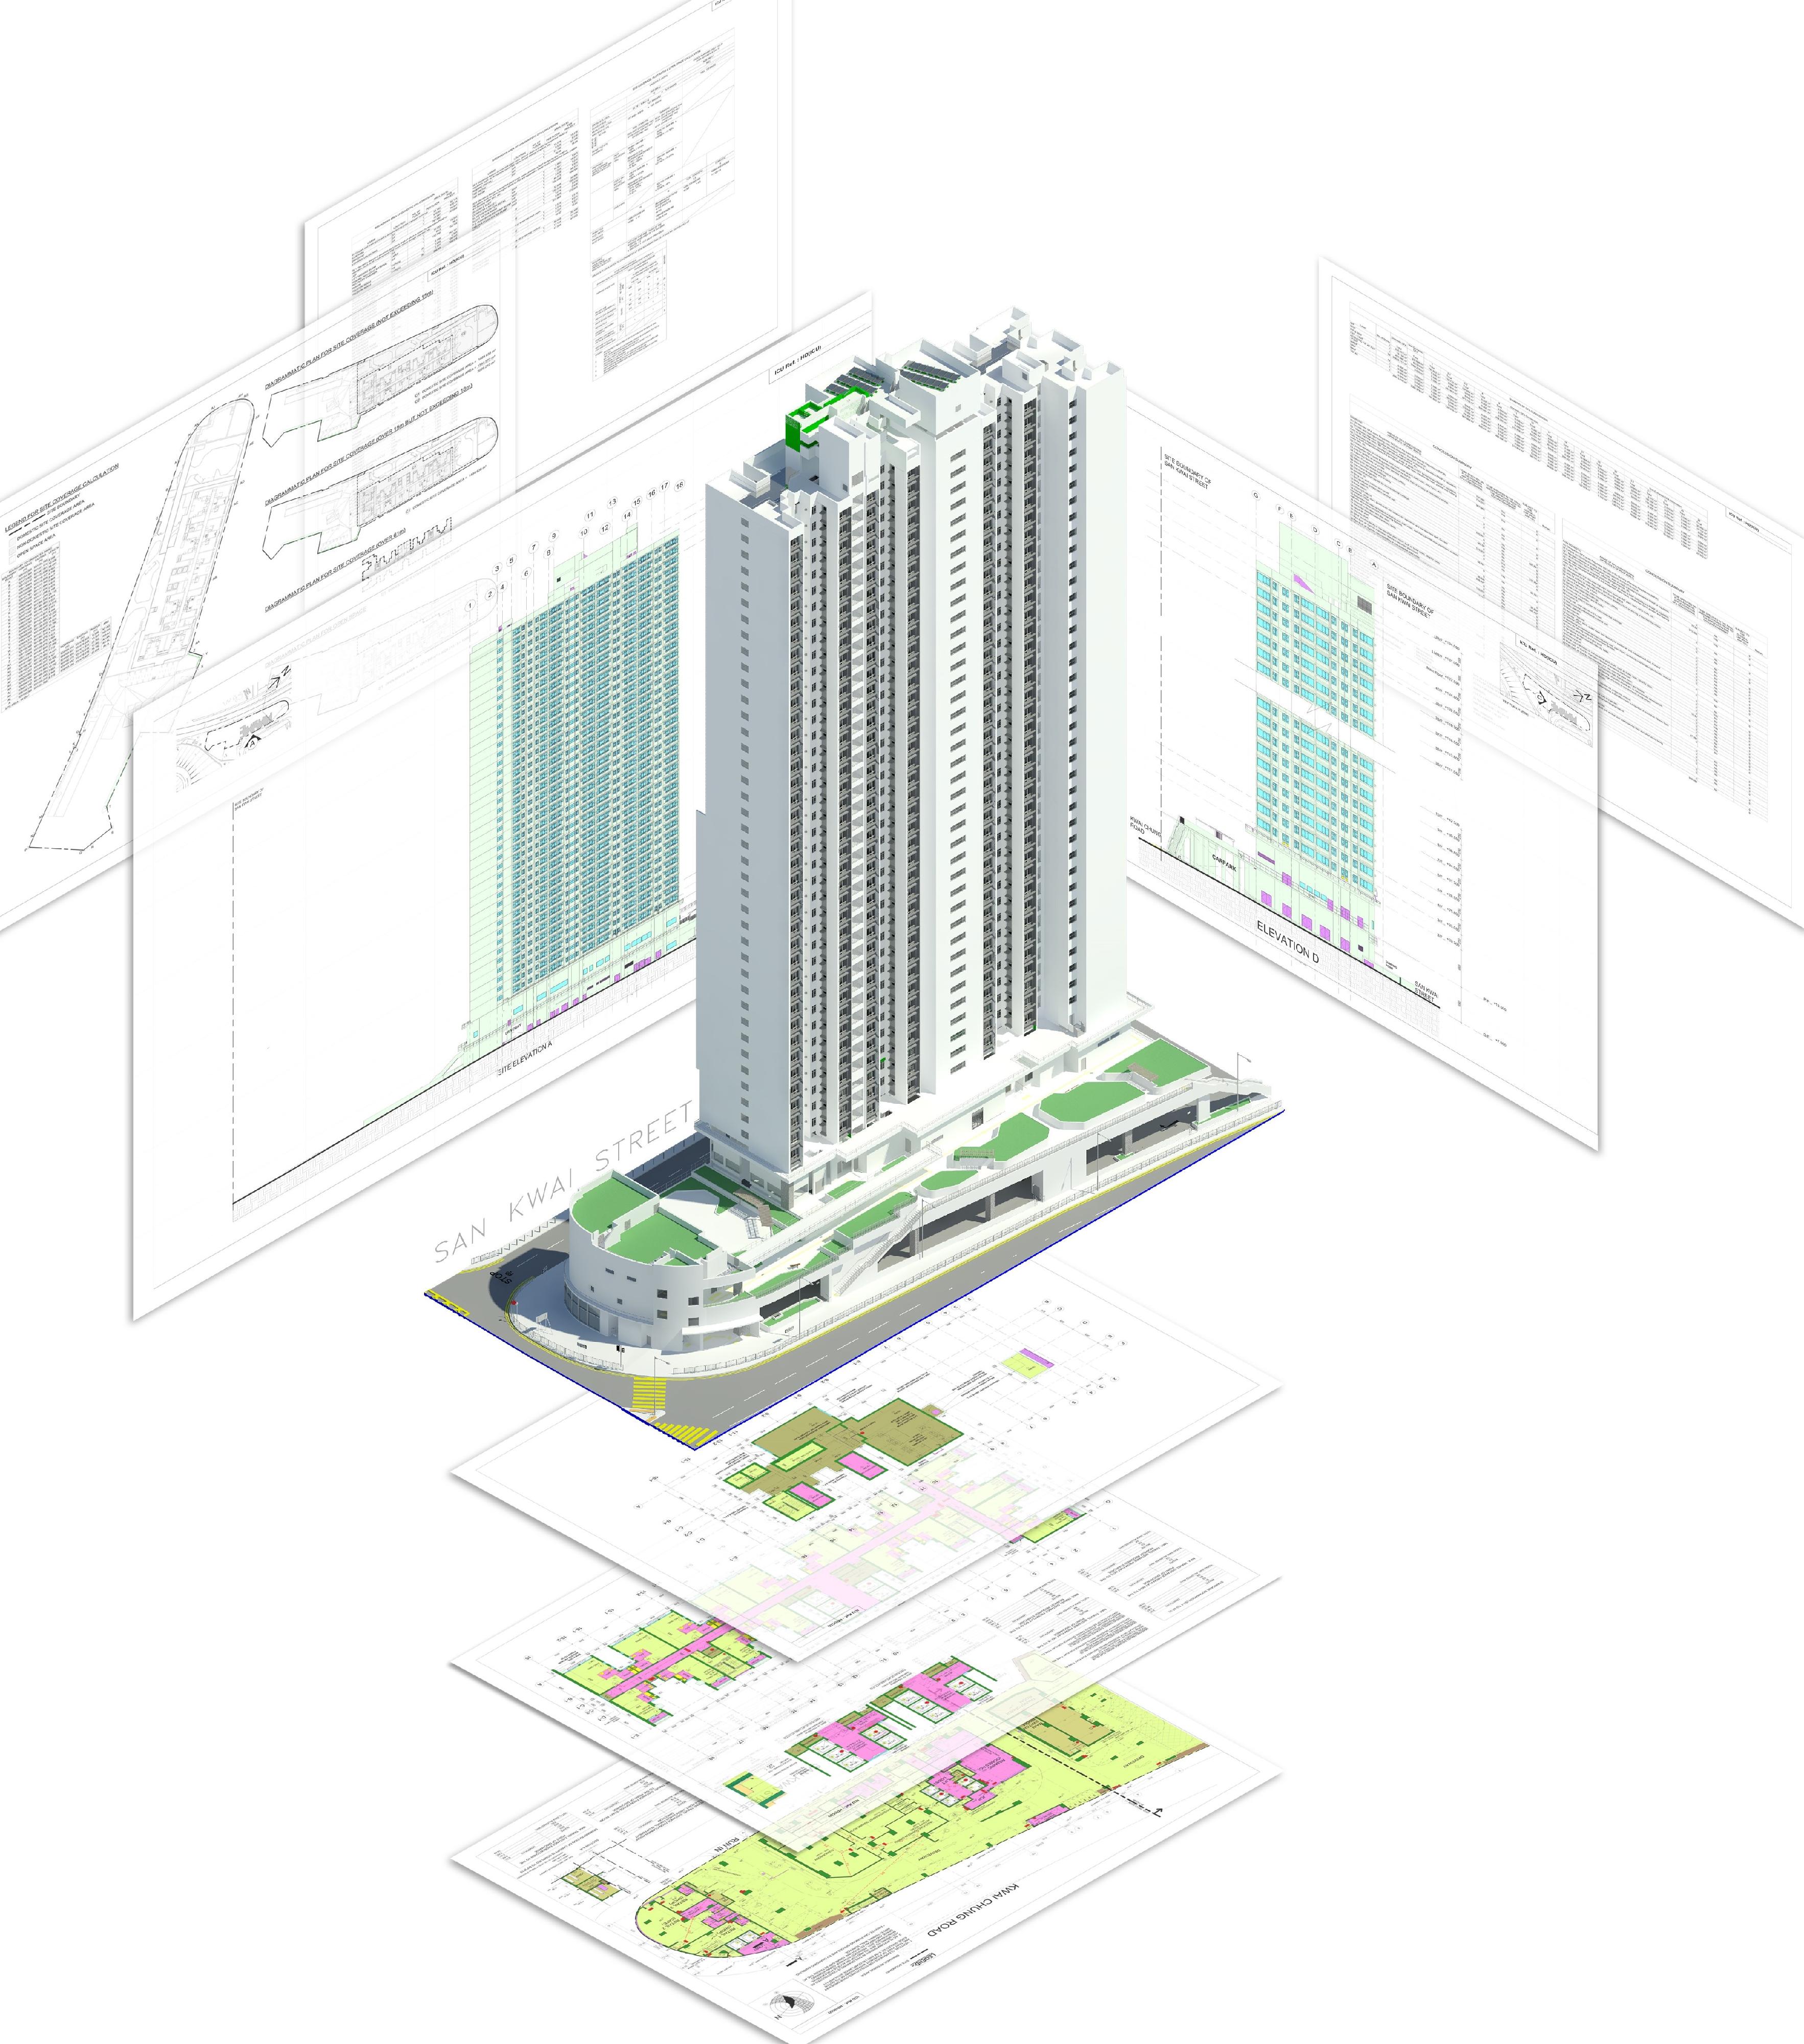 The Hong Kong Housing Authority's project "BIM in Statutory Submission and Control - a successful step" has won a project award in the Construction Industry Council Celebration of BIM Achievement 2022. The project focuses on the use of BIM for the drawing production process to facilitate the statutory submission, one of the most important aspects of BIM implementation in the construction industry. Photo shows a production of general building plans of the San Kwai Street public housing development project using BIM.